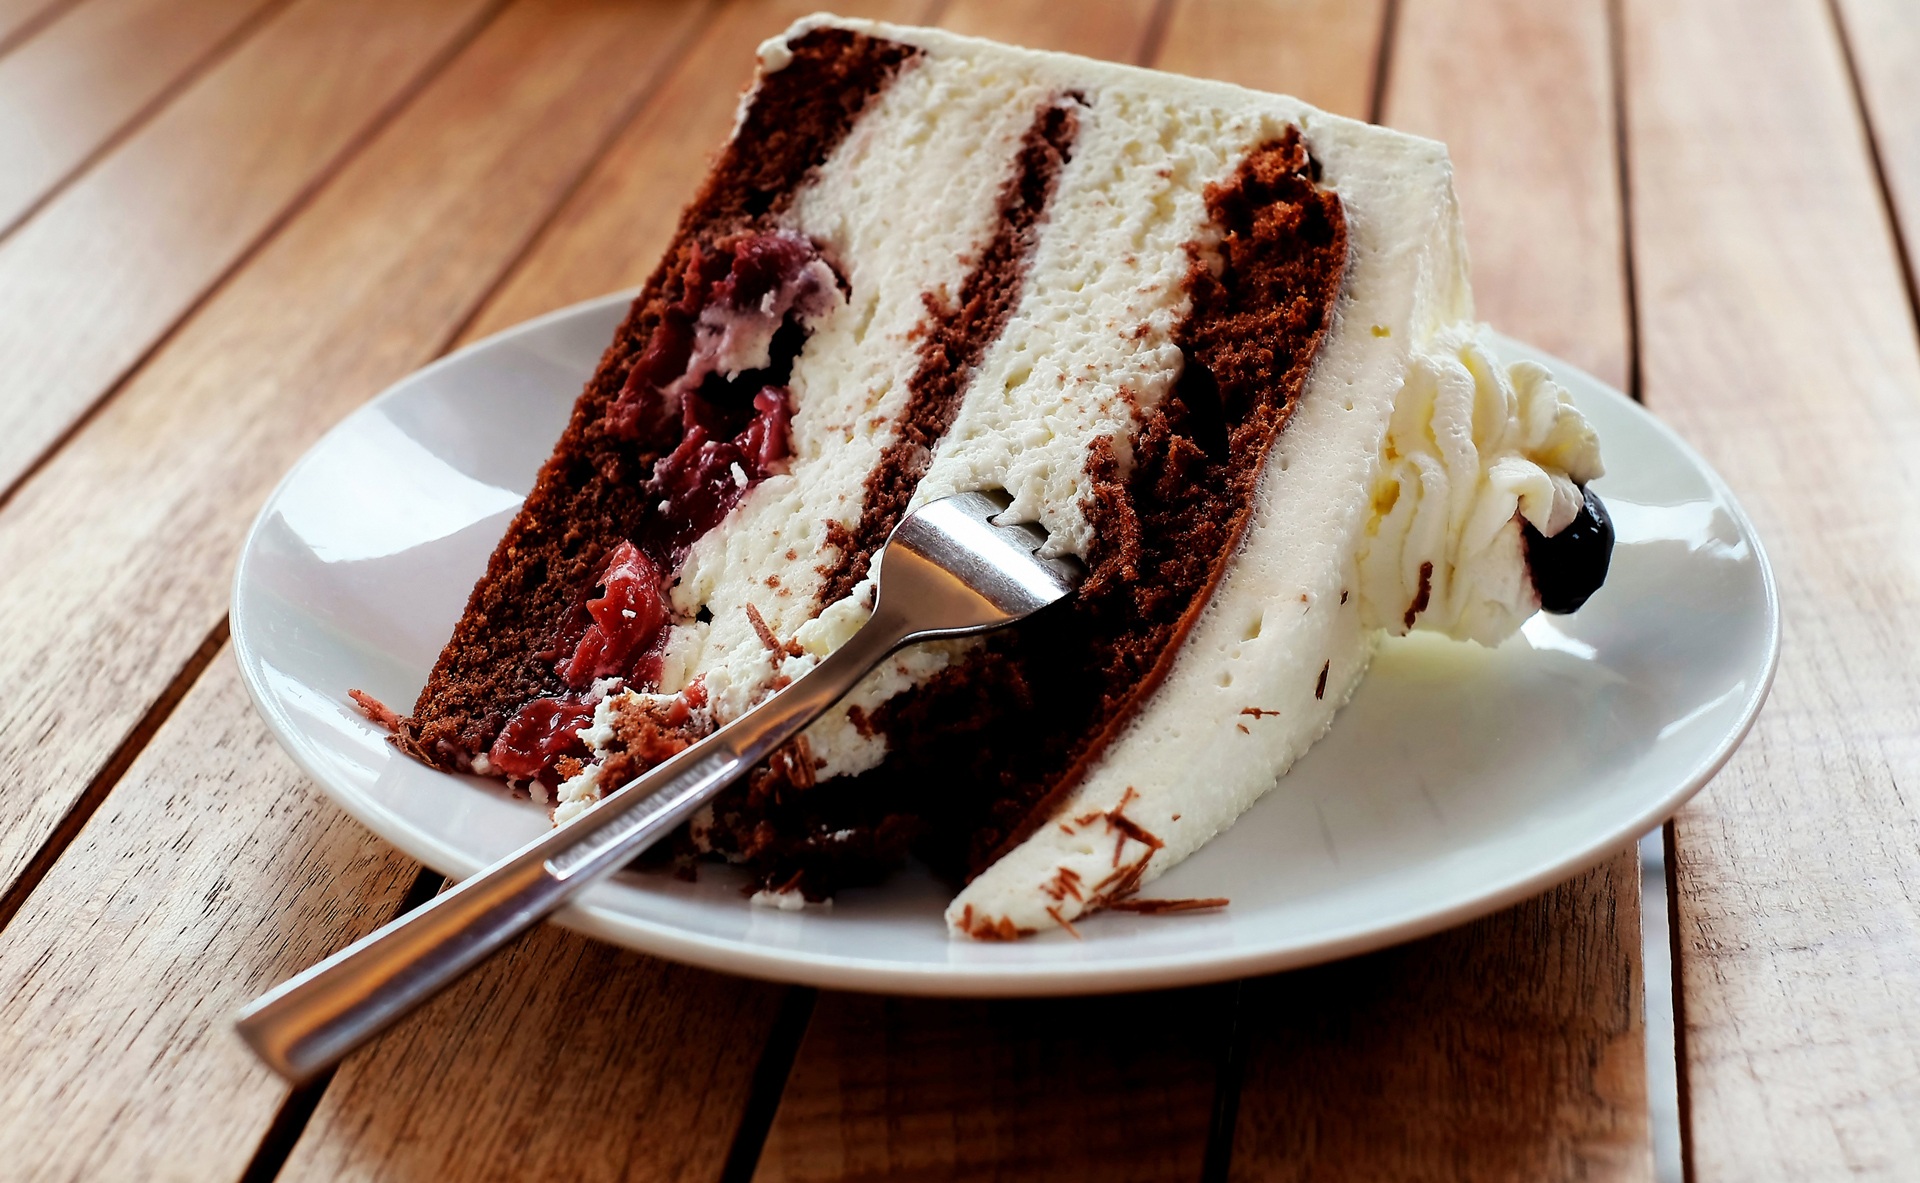 A piece of black forest cake by Couleur